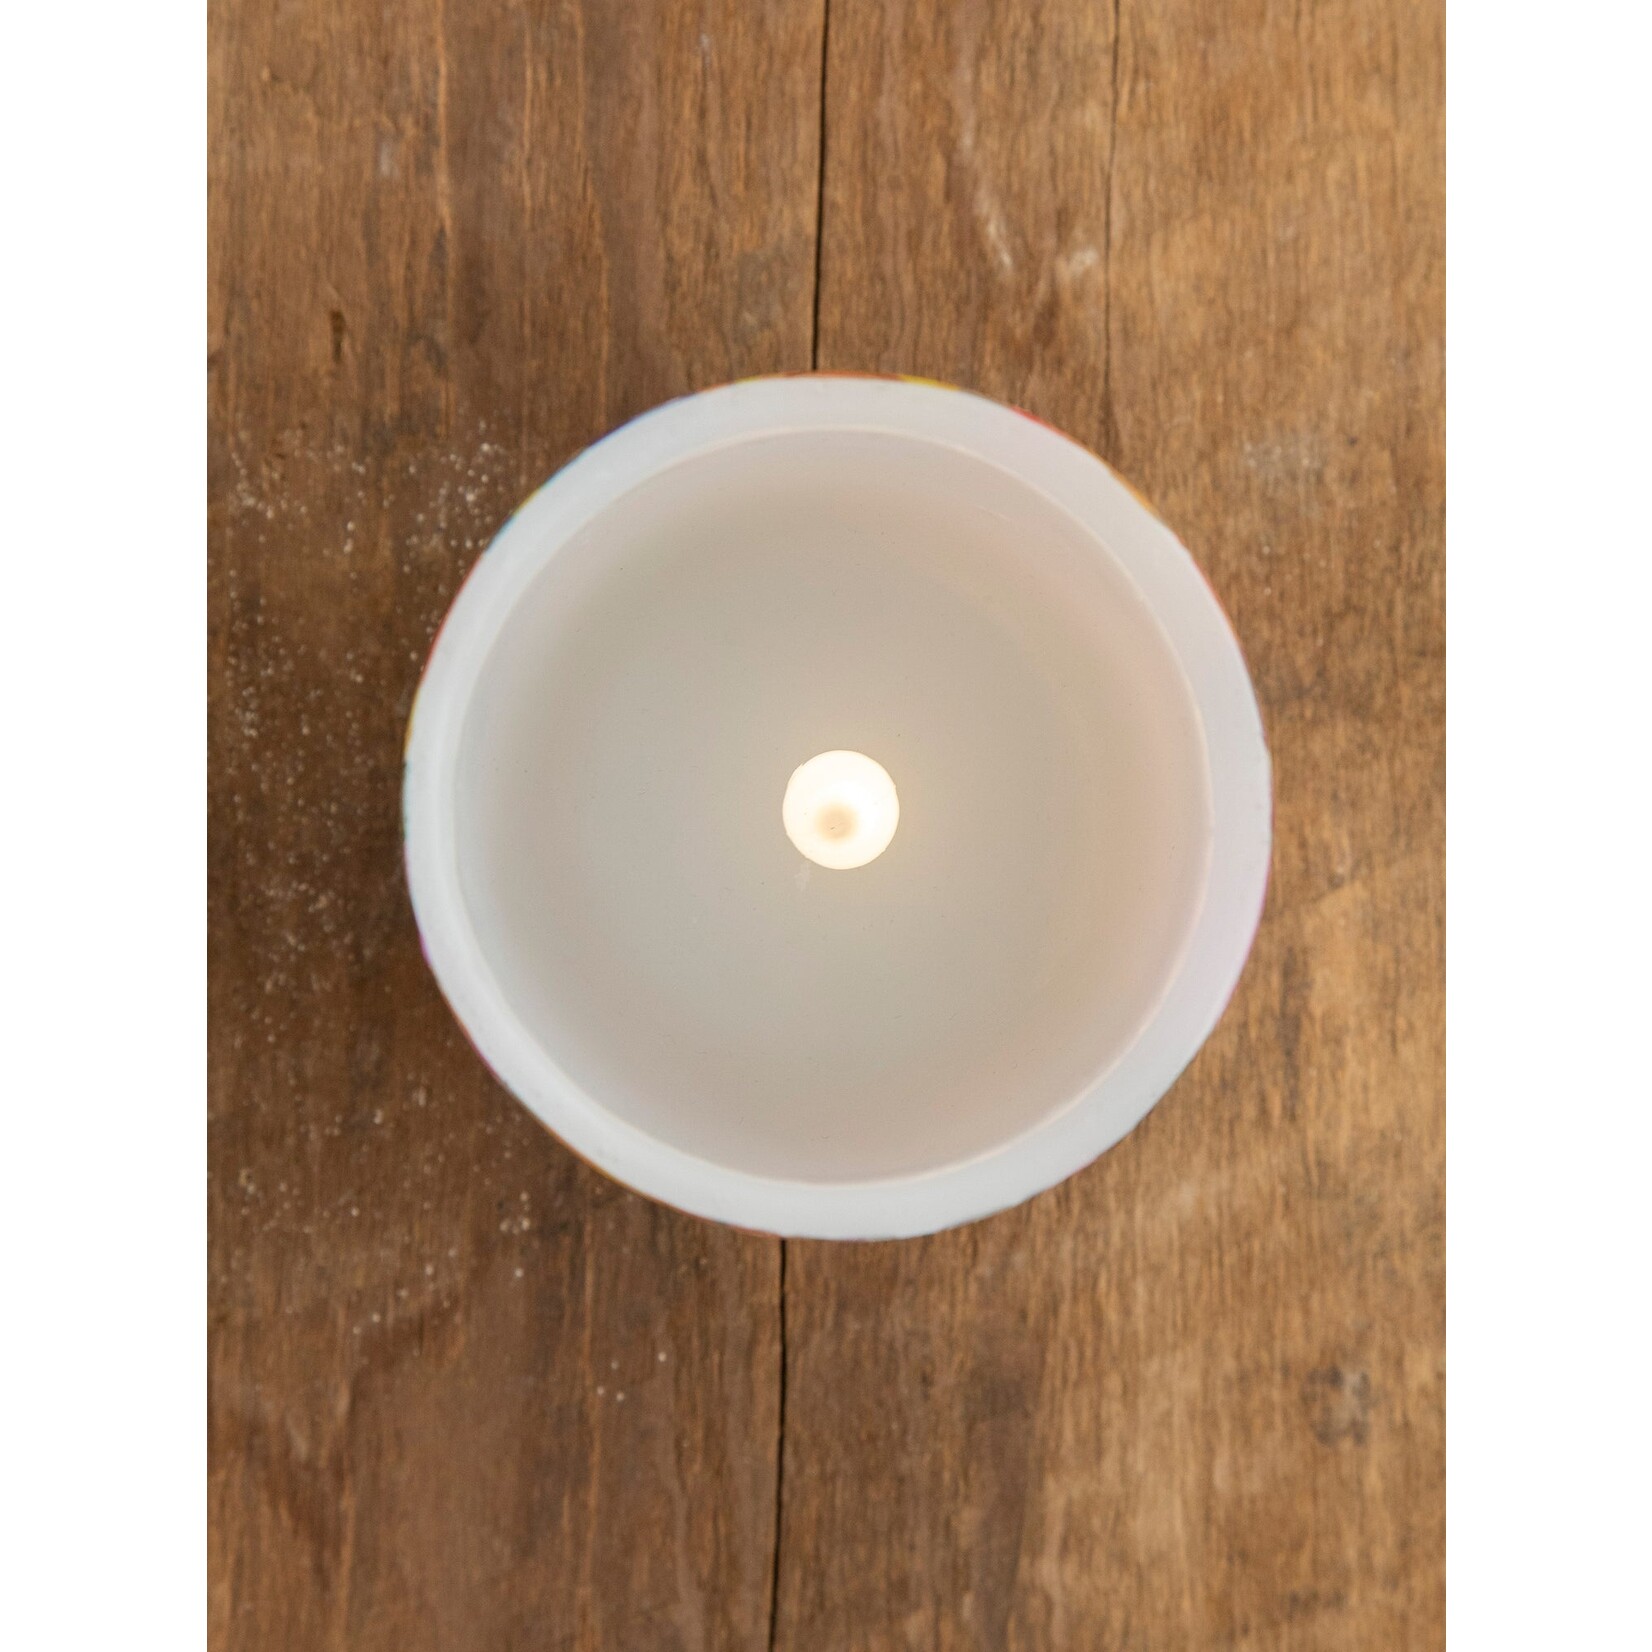 Natural Life Flameless Candle - You Are So Loved